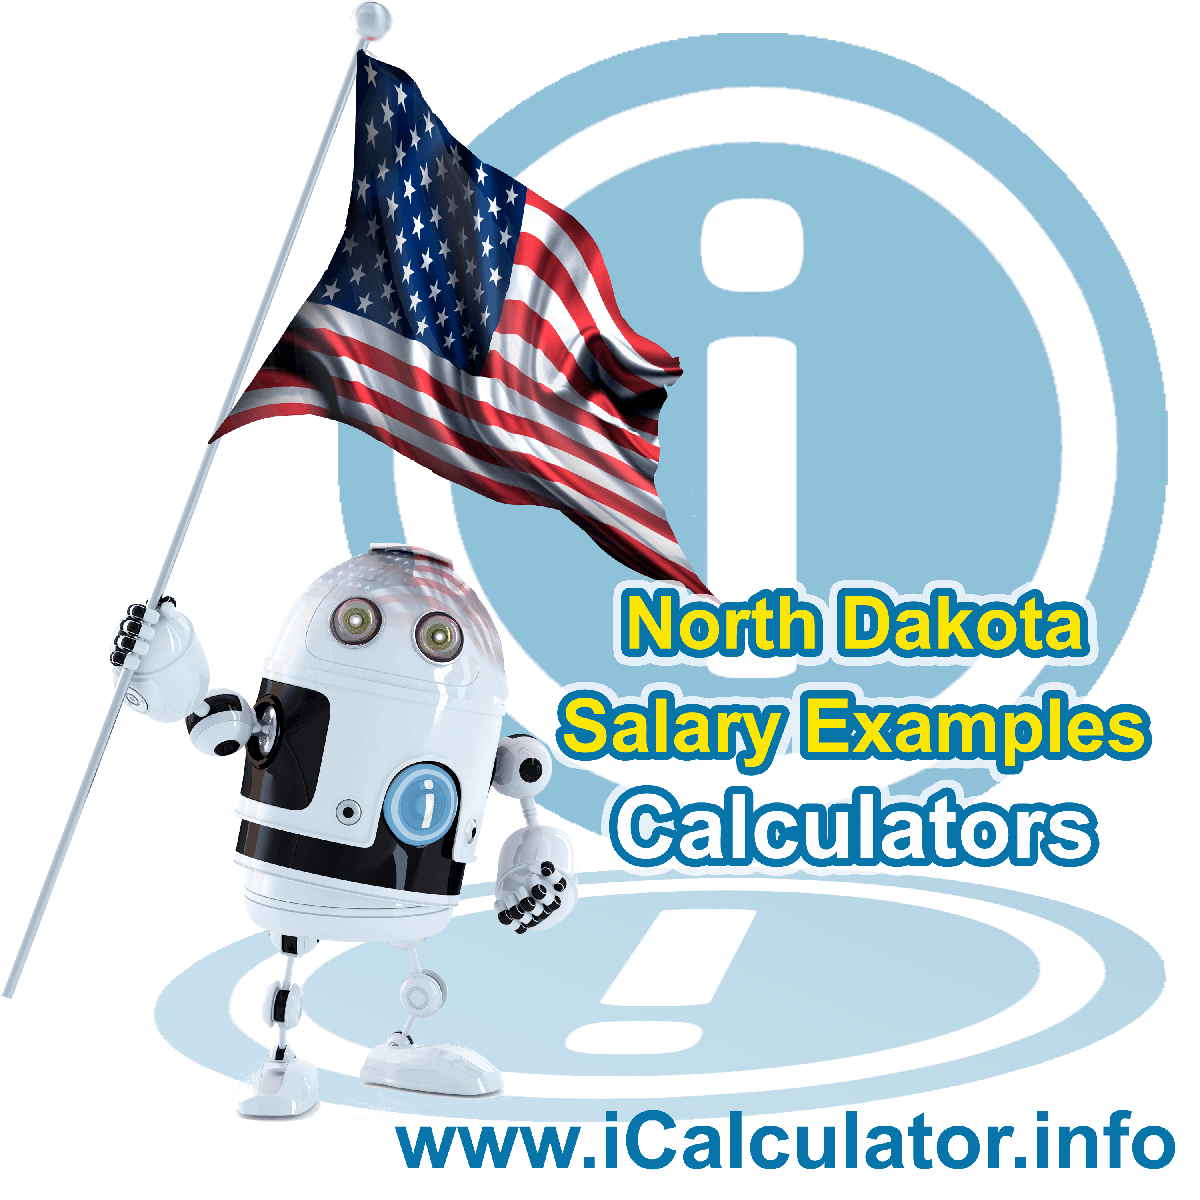 North Dakota Salary Example for $ 260,000.00 in 2023 | iCalculator™ | $ 260,000.00 salary example for employee and employer paying North Dakota State tincome taxes. Detailed salary after tax calculation including North Dakota State Tax, Federal State Tax, Medicare Deductions, Social Security, Capital Gains and other income tax and salary deductions complete with supporting North Dakota state tax tables 